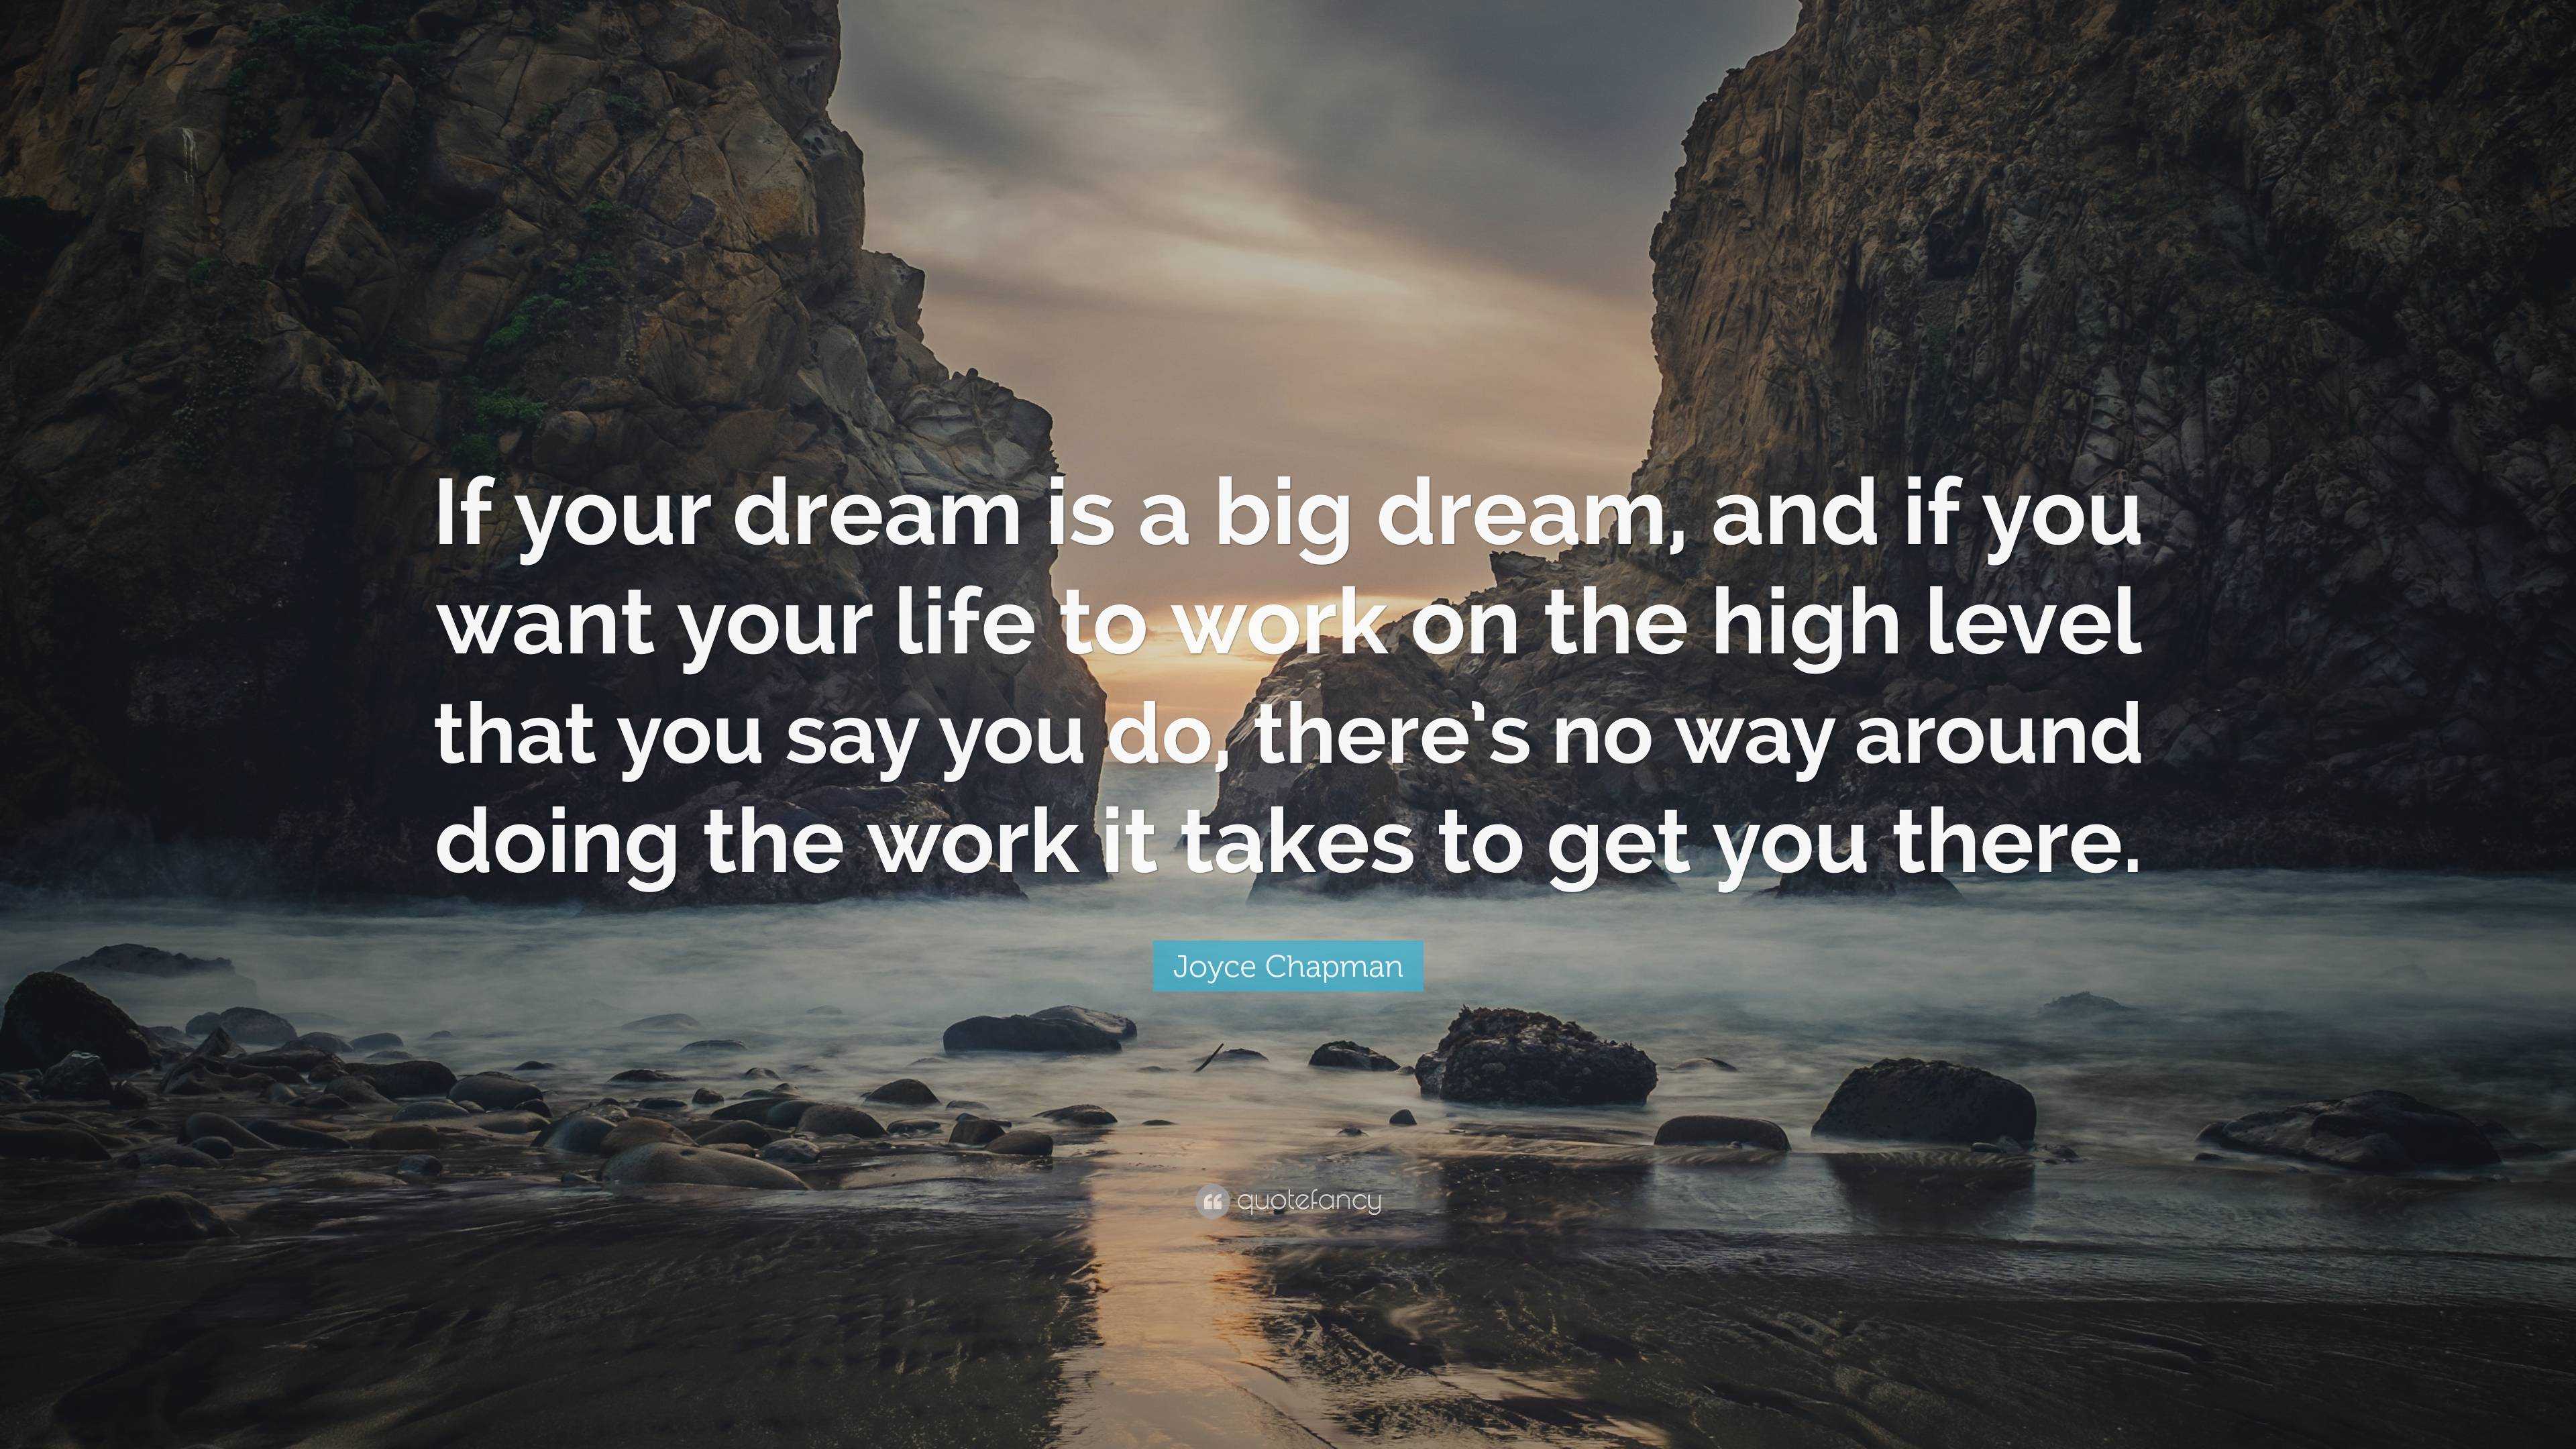 If you are going to dream, it's good to dream big - Albert Lea